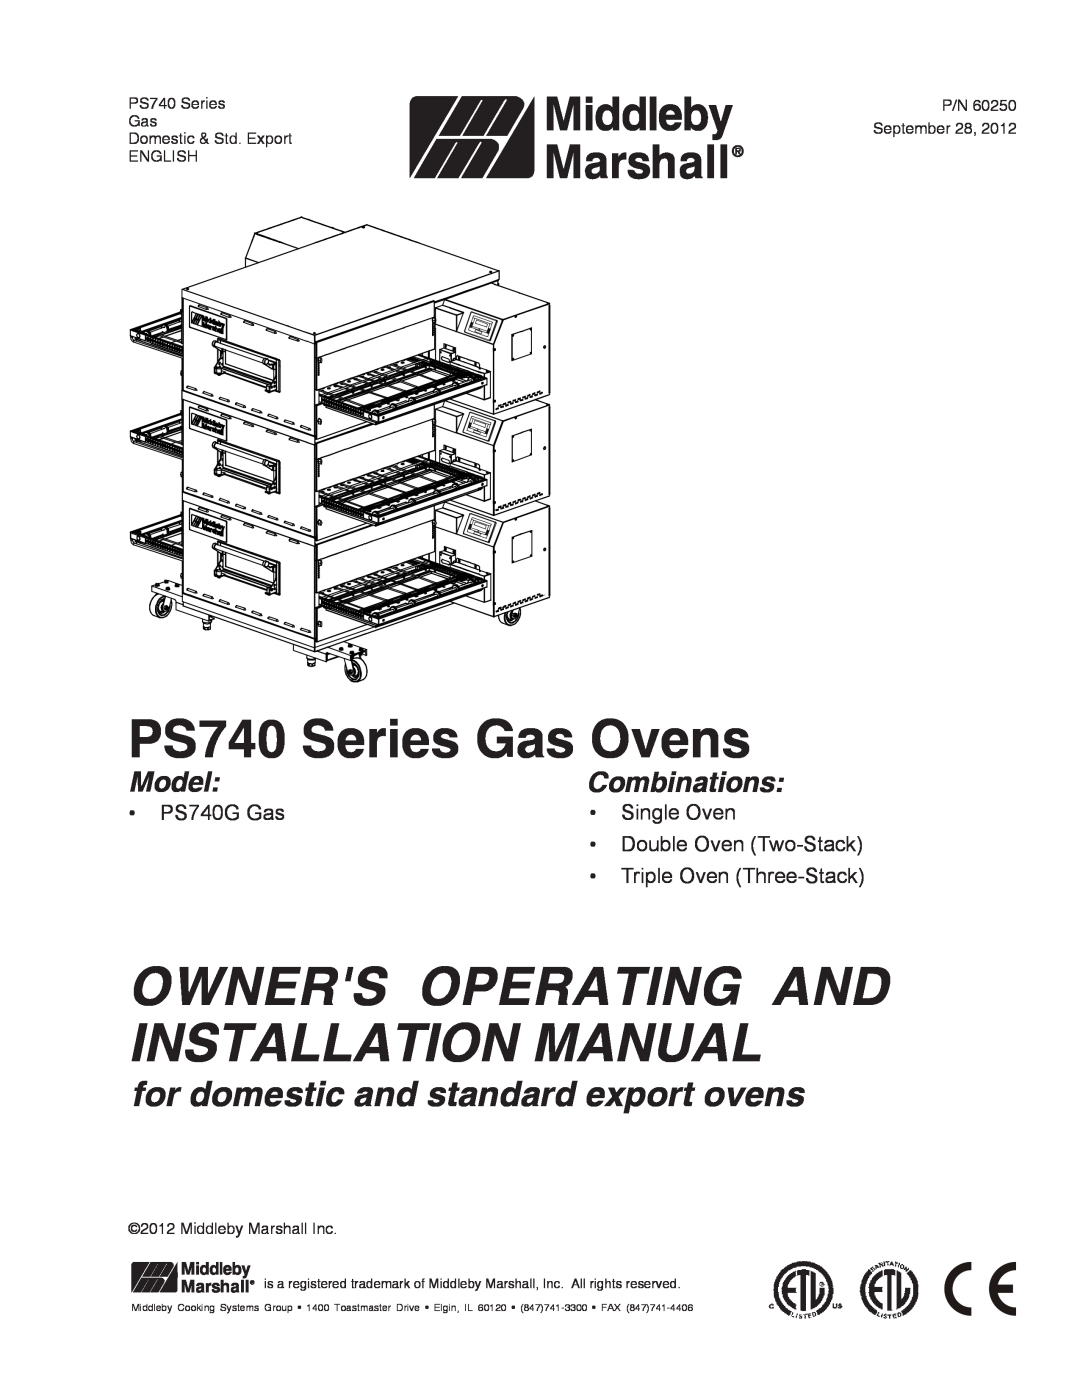 Middleby Marshall P/N 60250 installation manual PS740 Series Gas Ovens, Owners Operating And Installation Manual, Model 